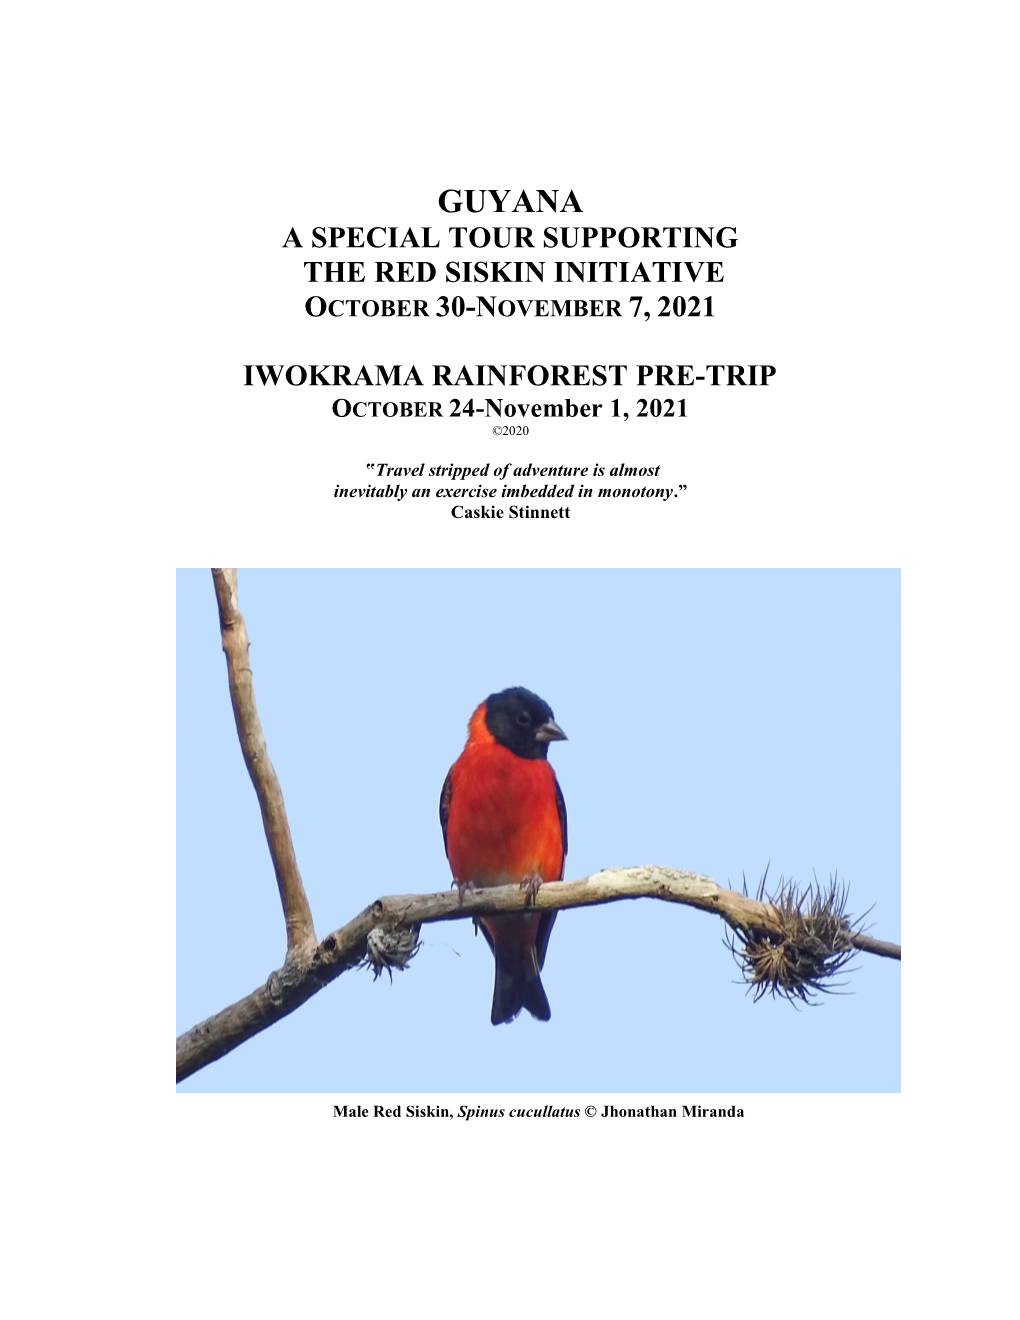 Guyana a Special Tour Supporting the Red Siskin Initiative October 30-November 7, 2021